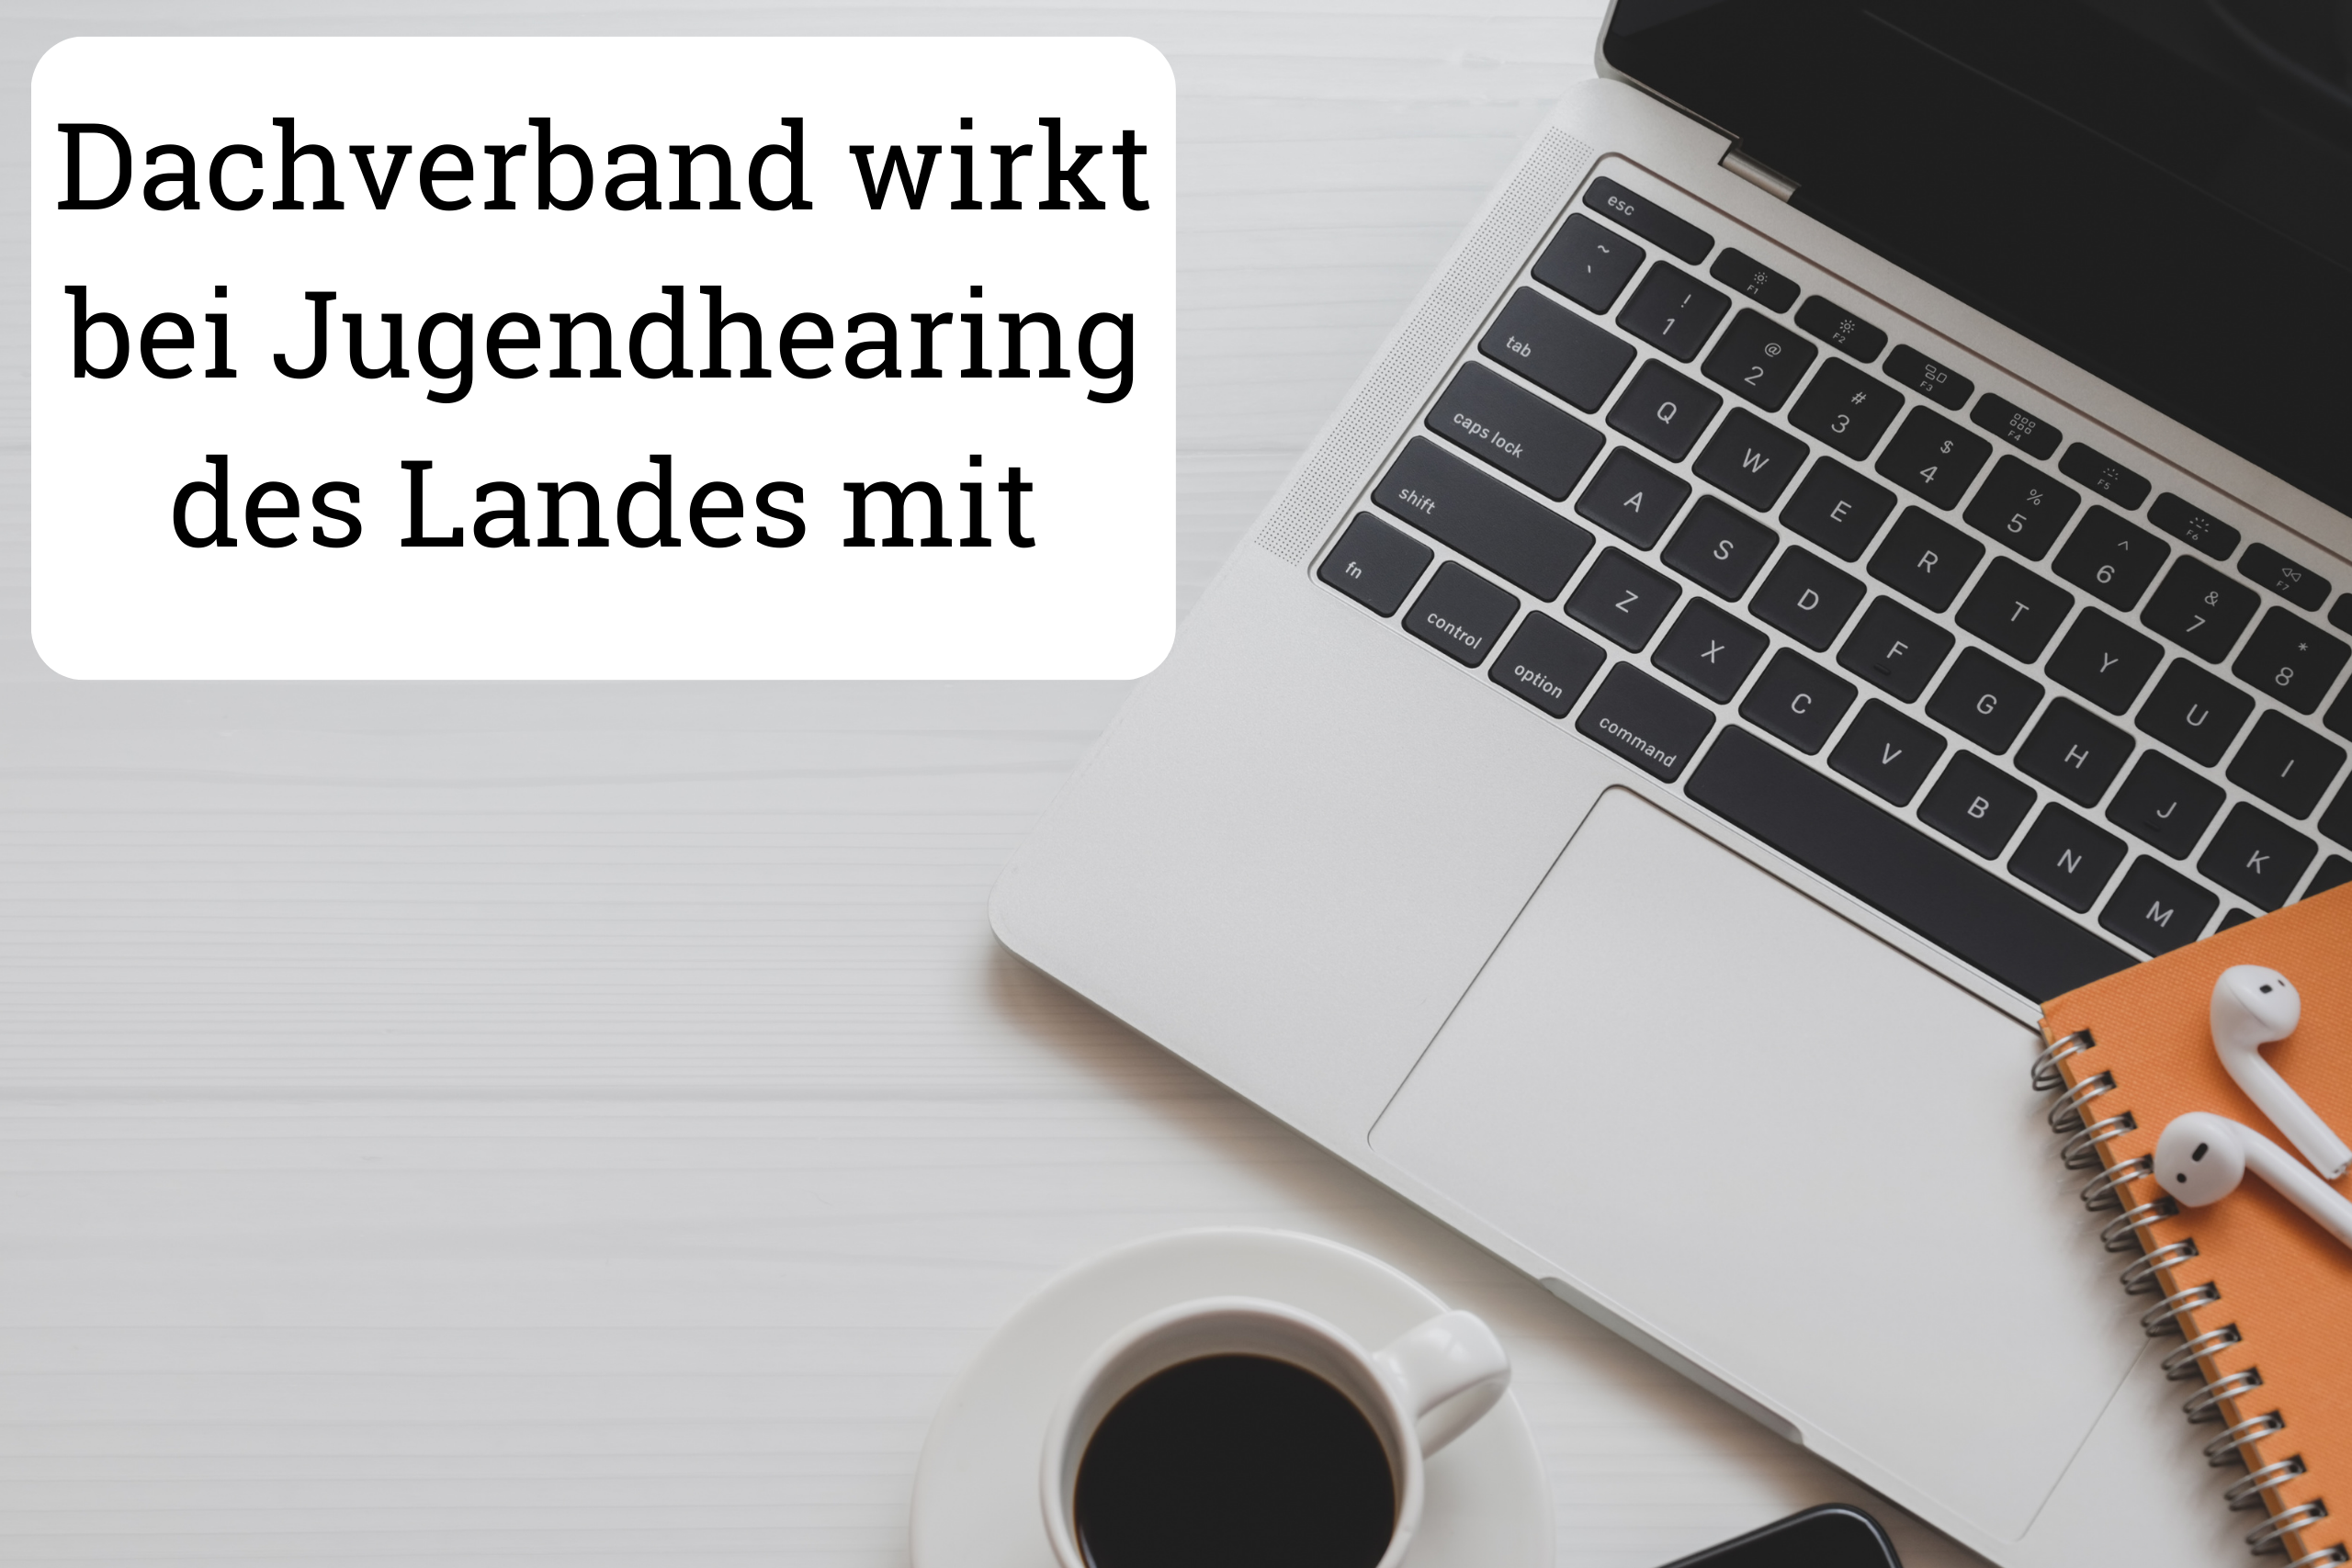 You are currently viewing Dachverband wirkt bei Jugendhearing des Landes mit